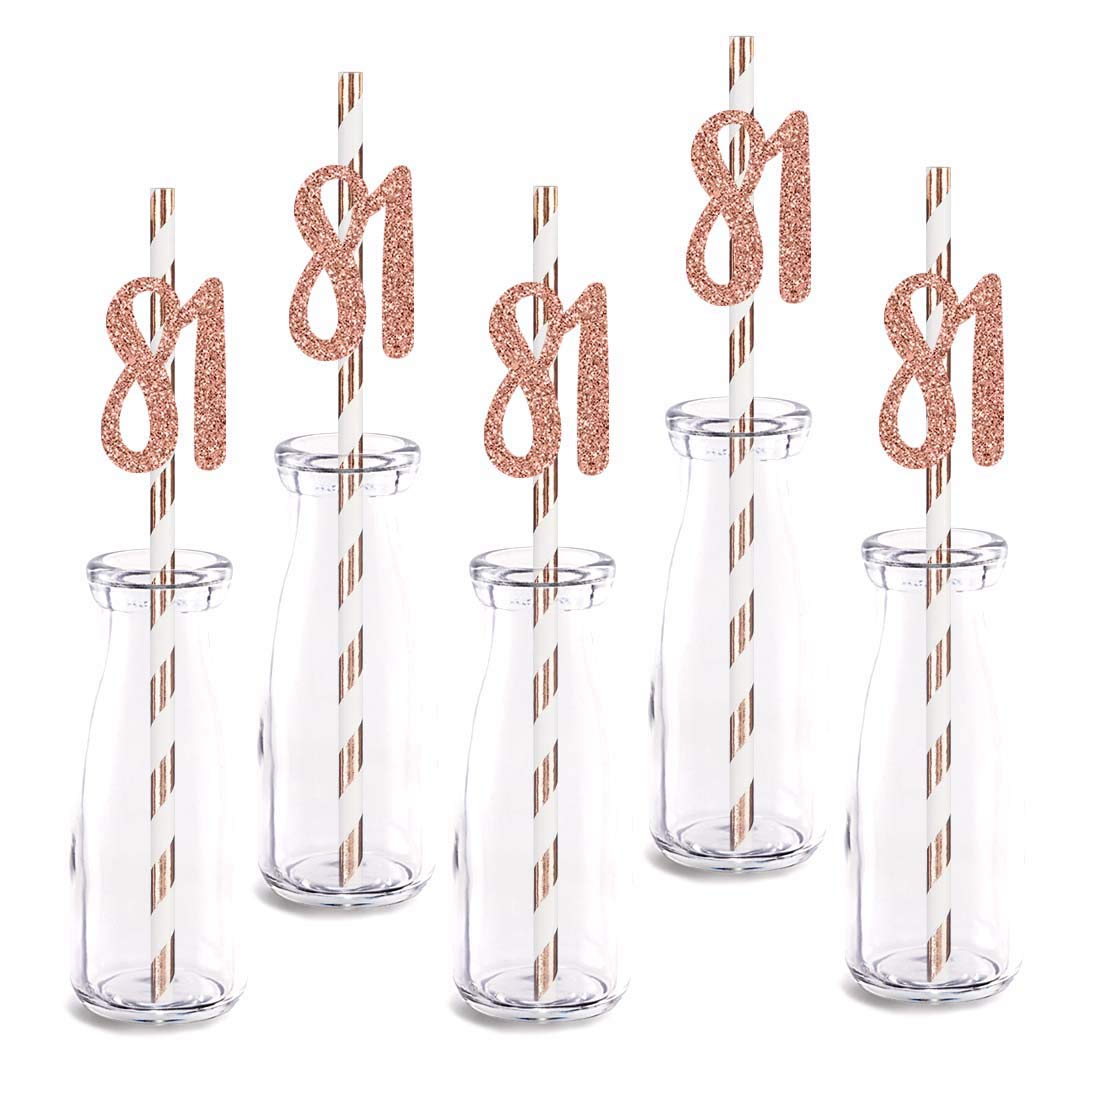 Rose Happy 81st Birthday Straw Decor, Rose Gold Glitter 24pcs Cut-Out Number 81 Party Drinking Decorative Straws, Supplies